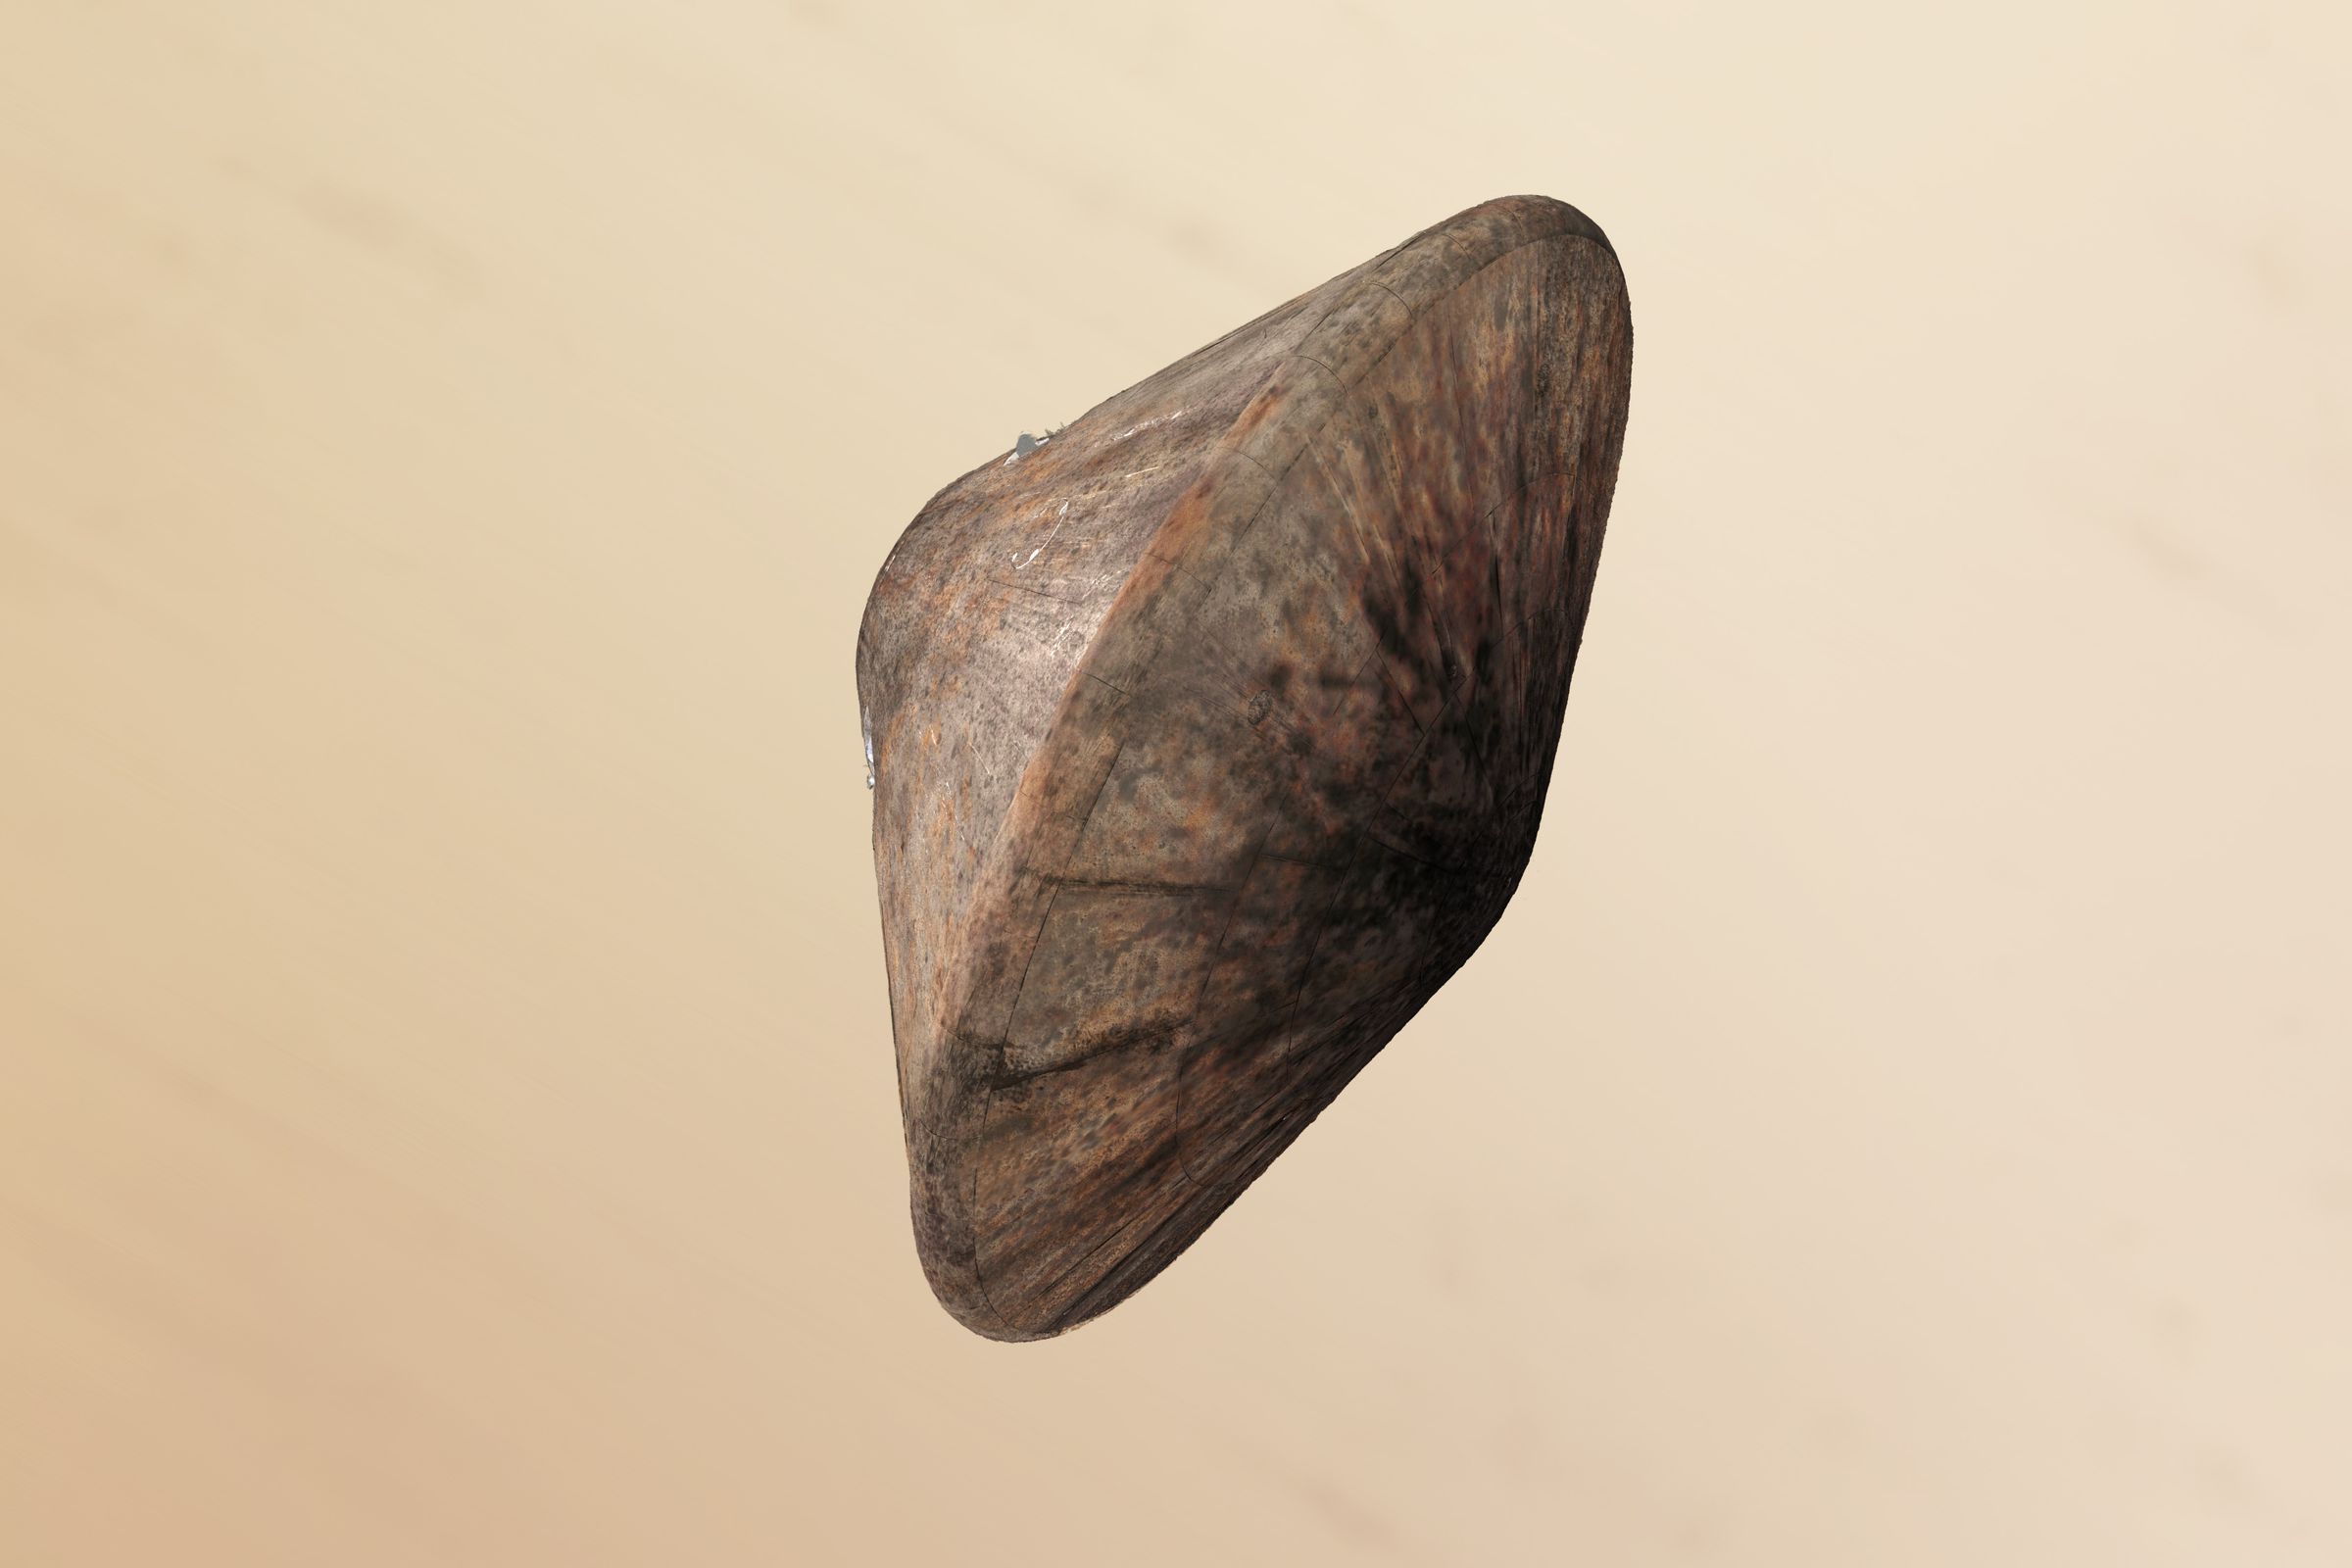 A rendering of the Schiaparelli lander with its heat shield